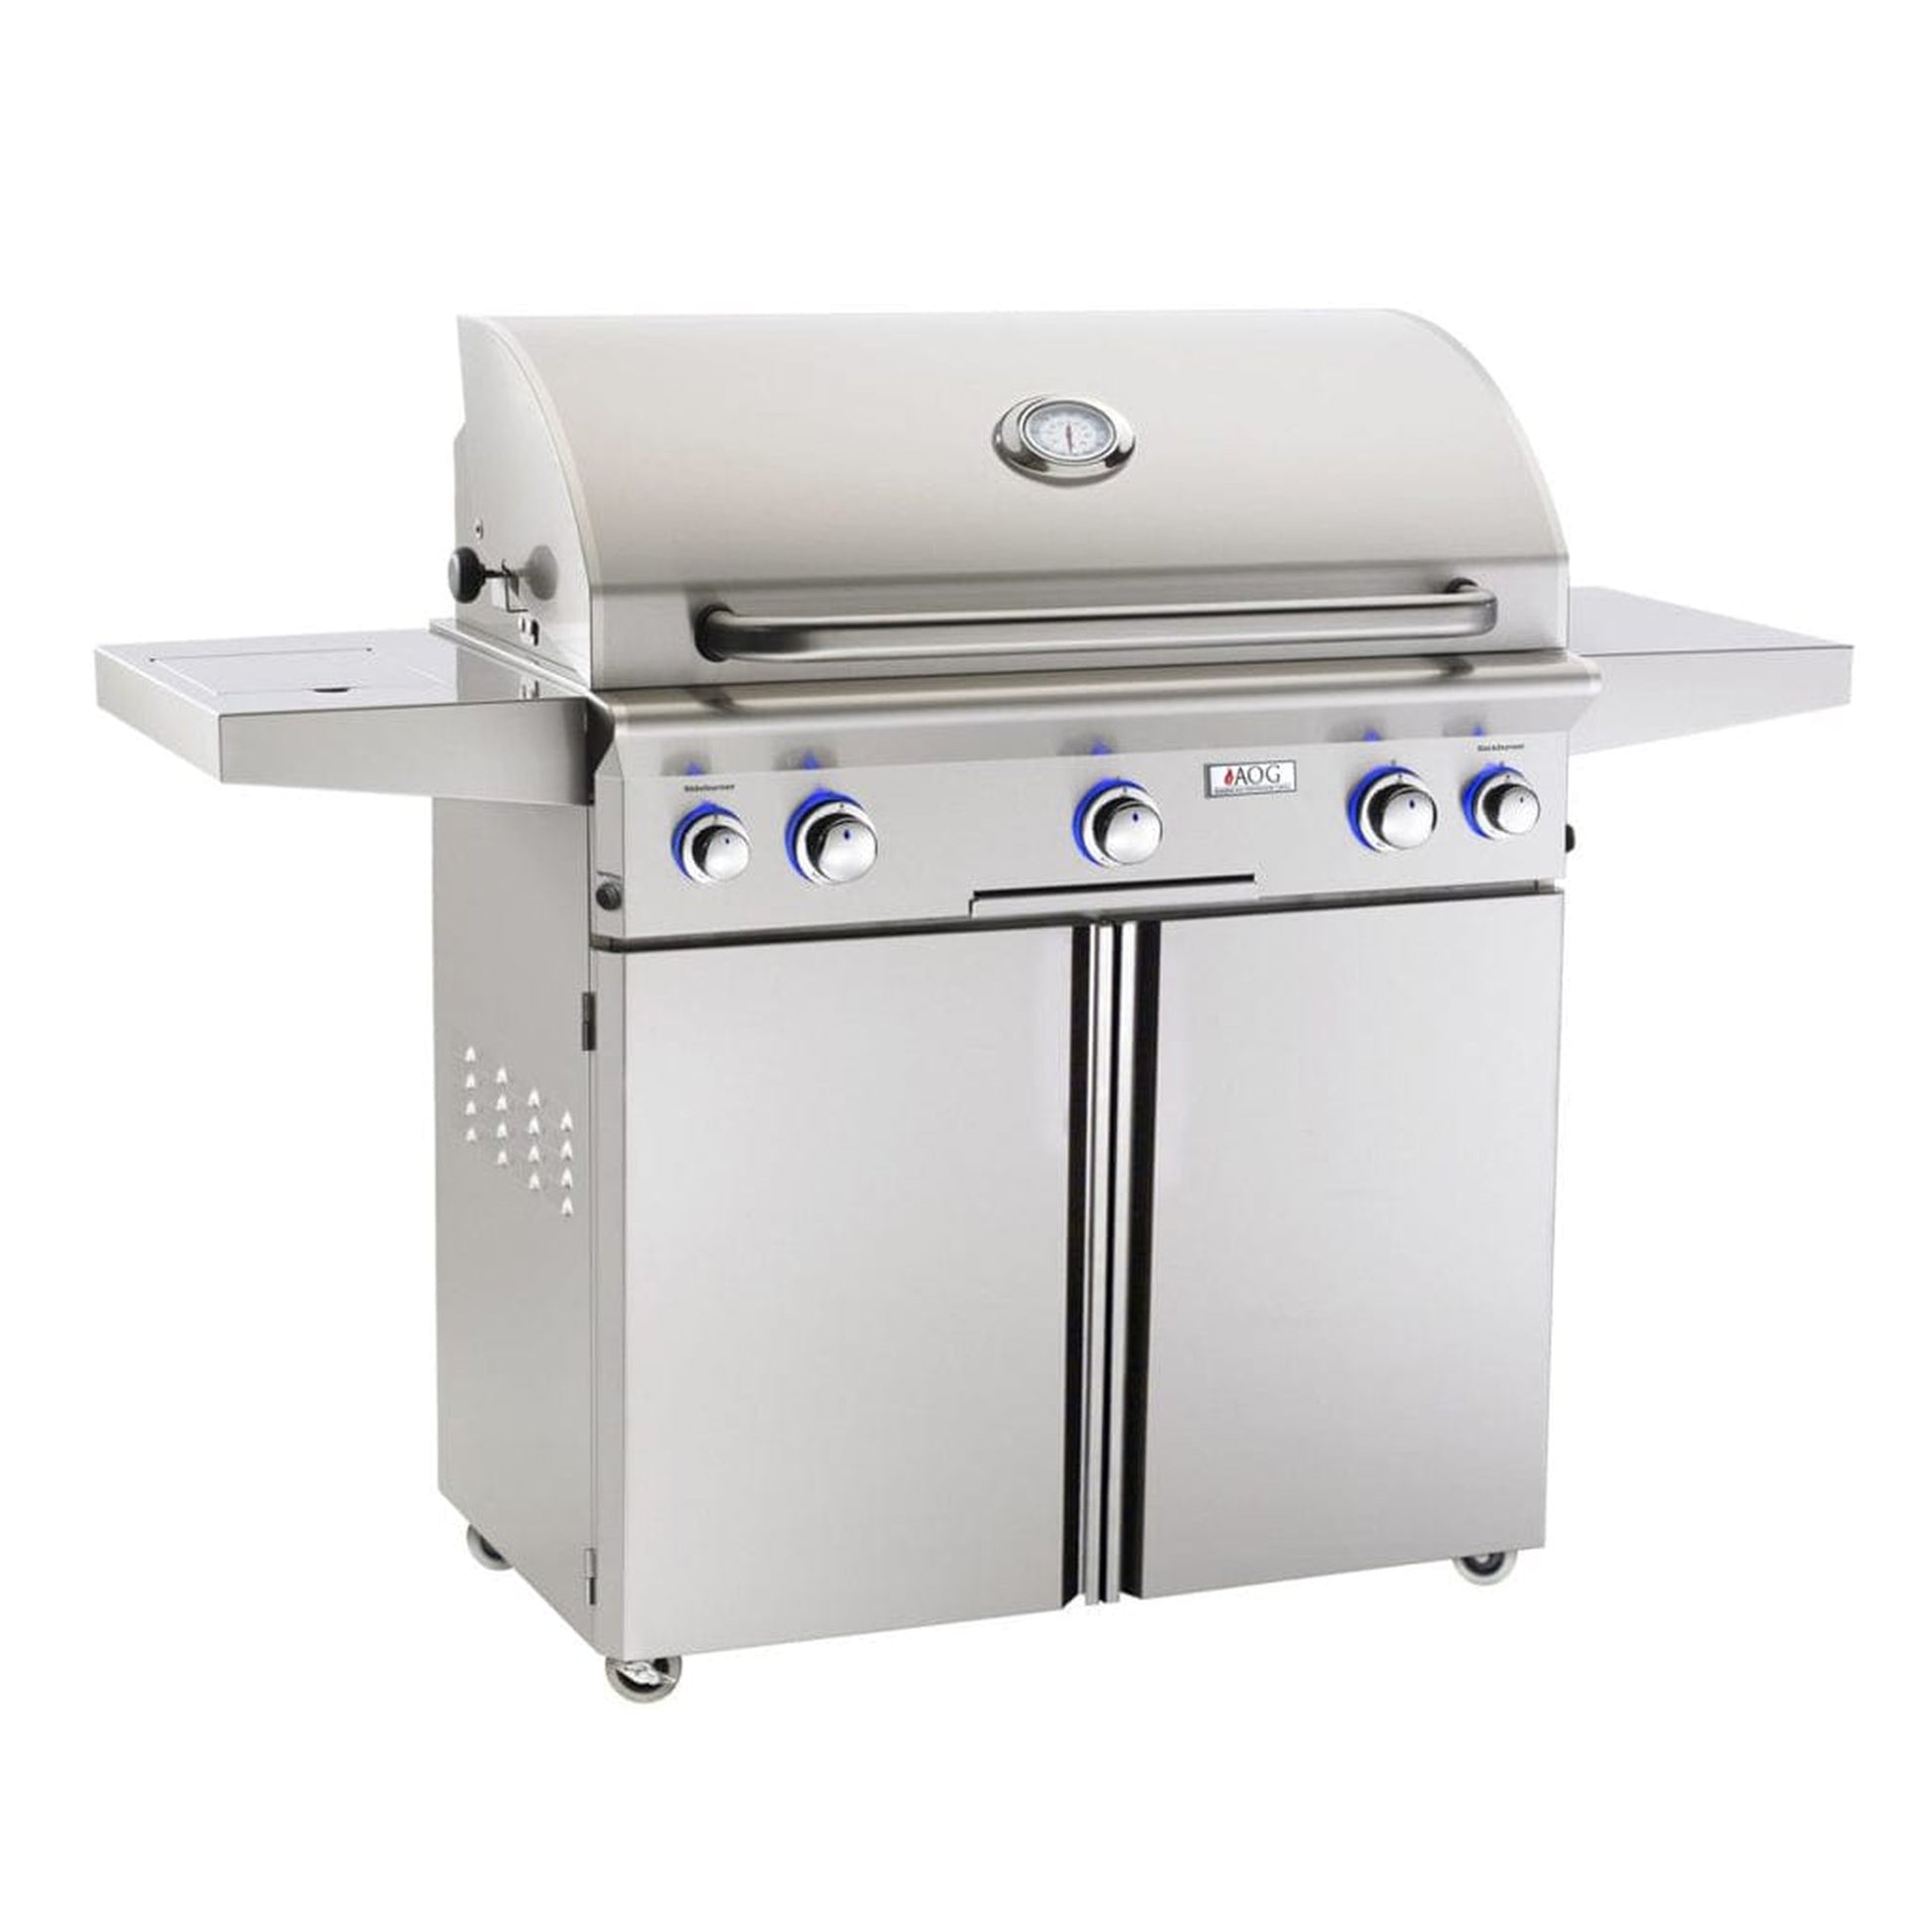 American Outdoor Grill 36" L-Series Portable 3-Burner Propane Gas Grill